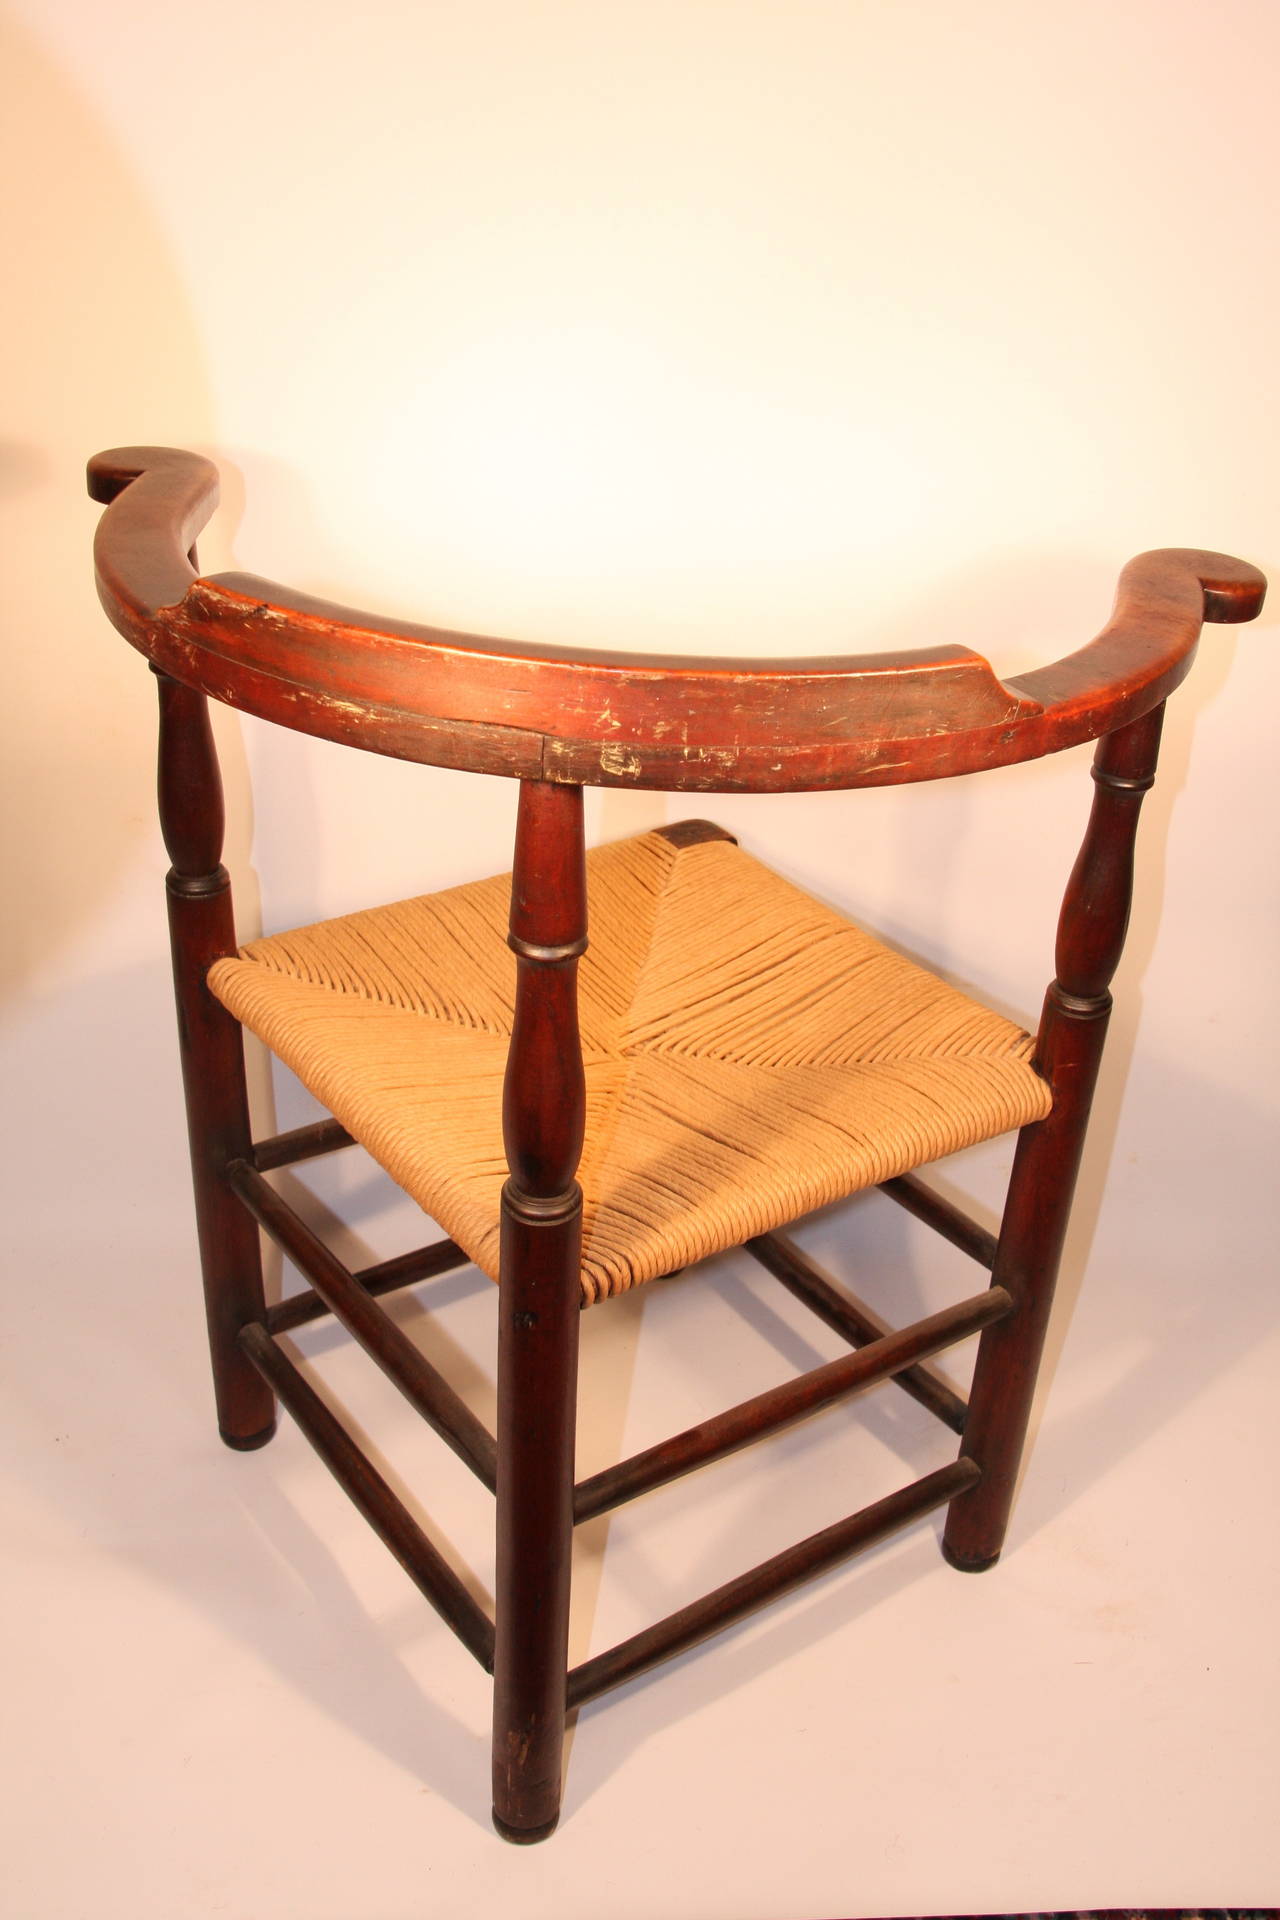 American 18th Century New England Roundabout Chair For Sale